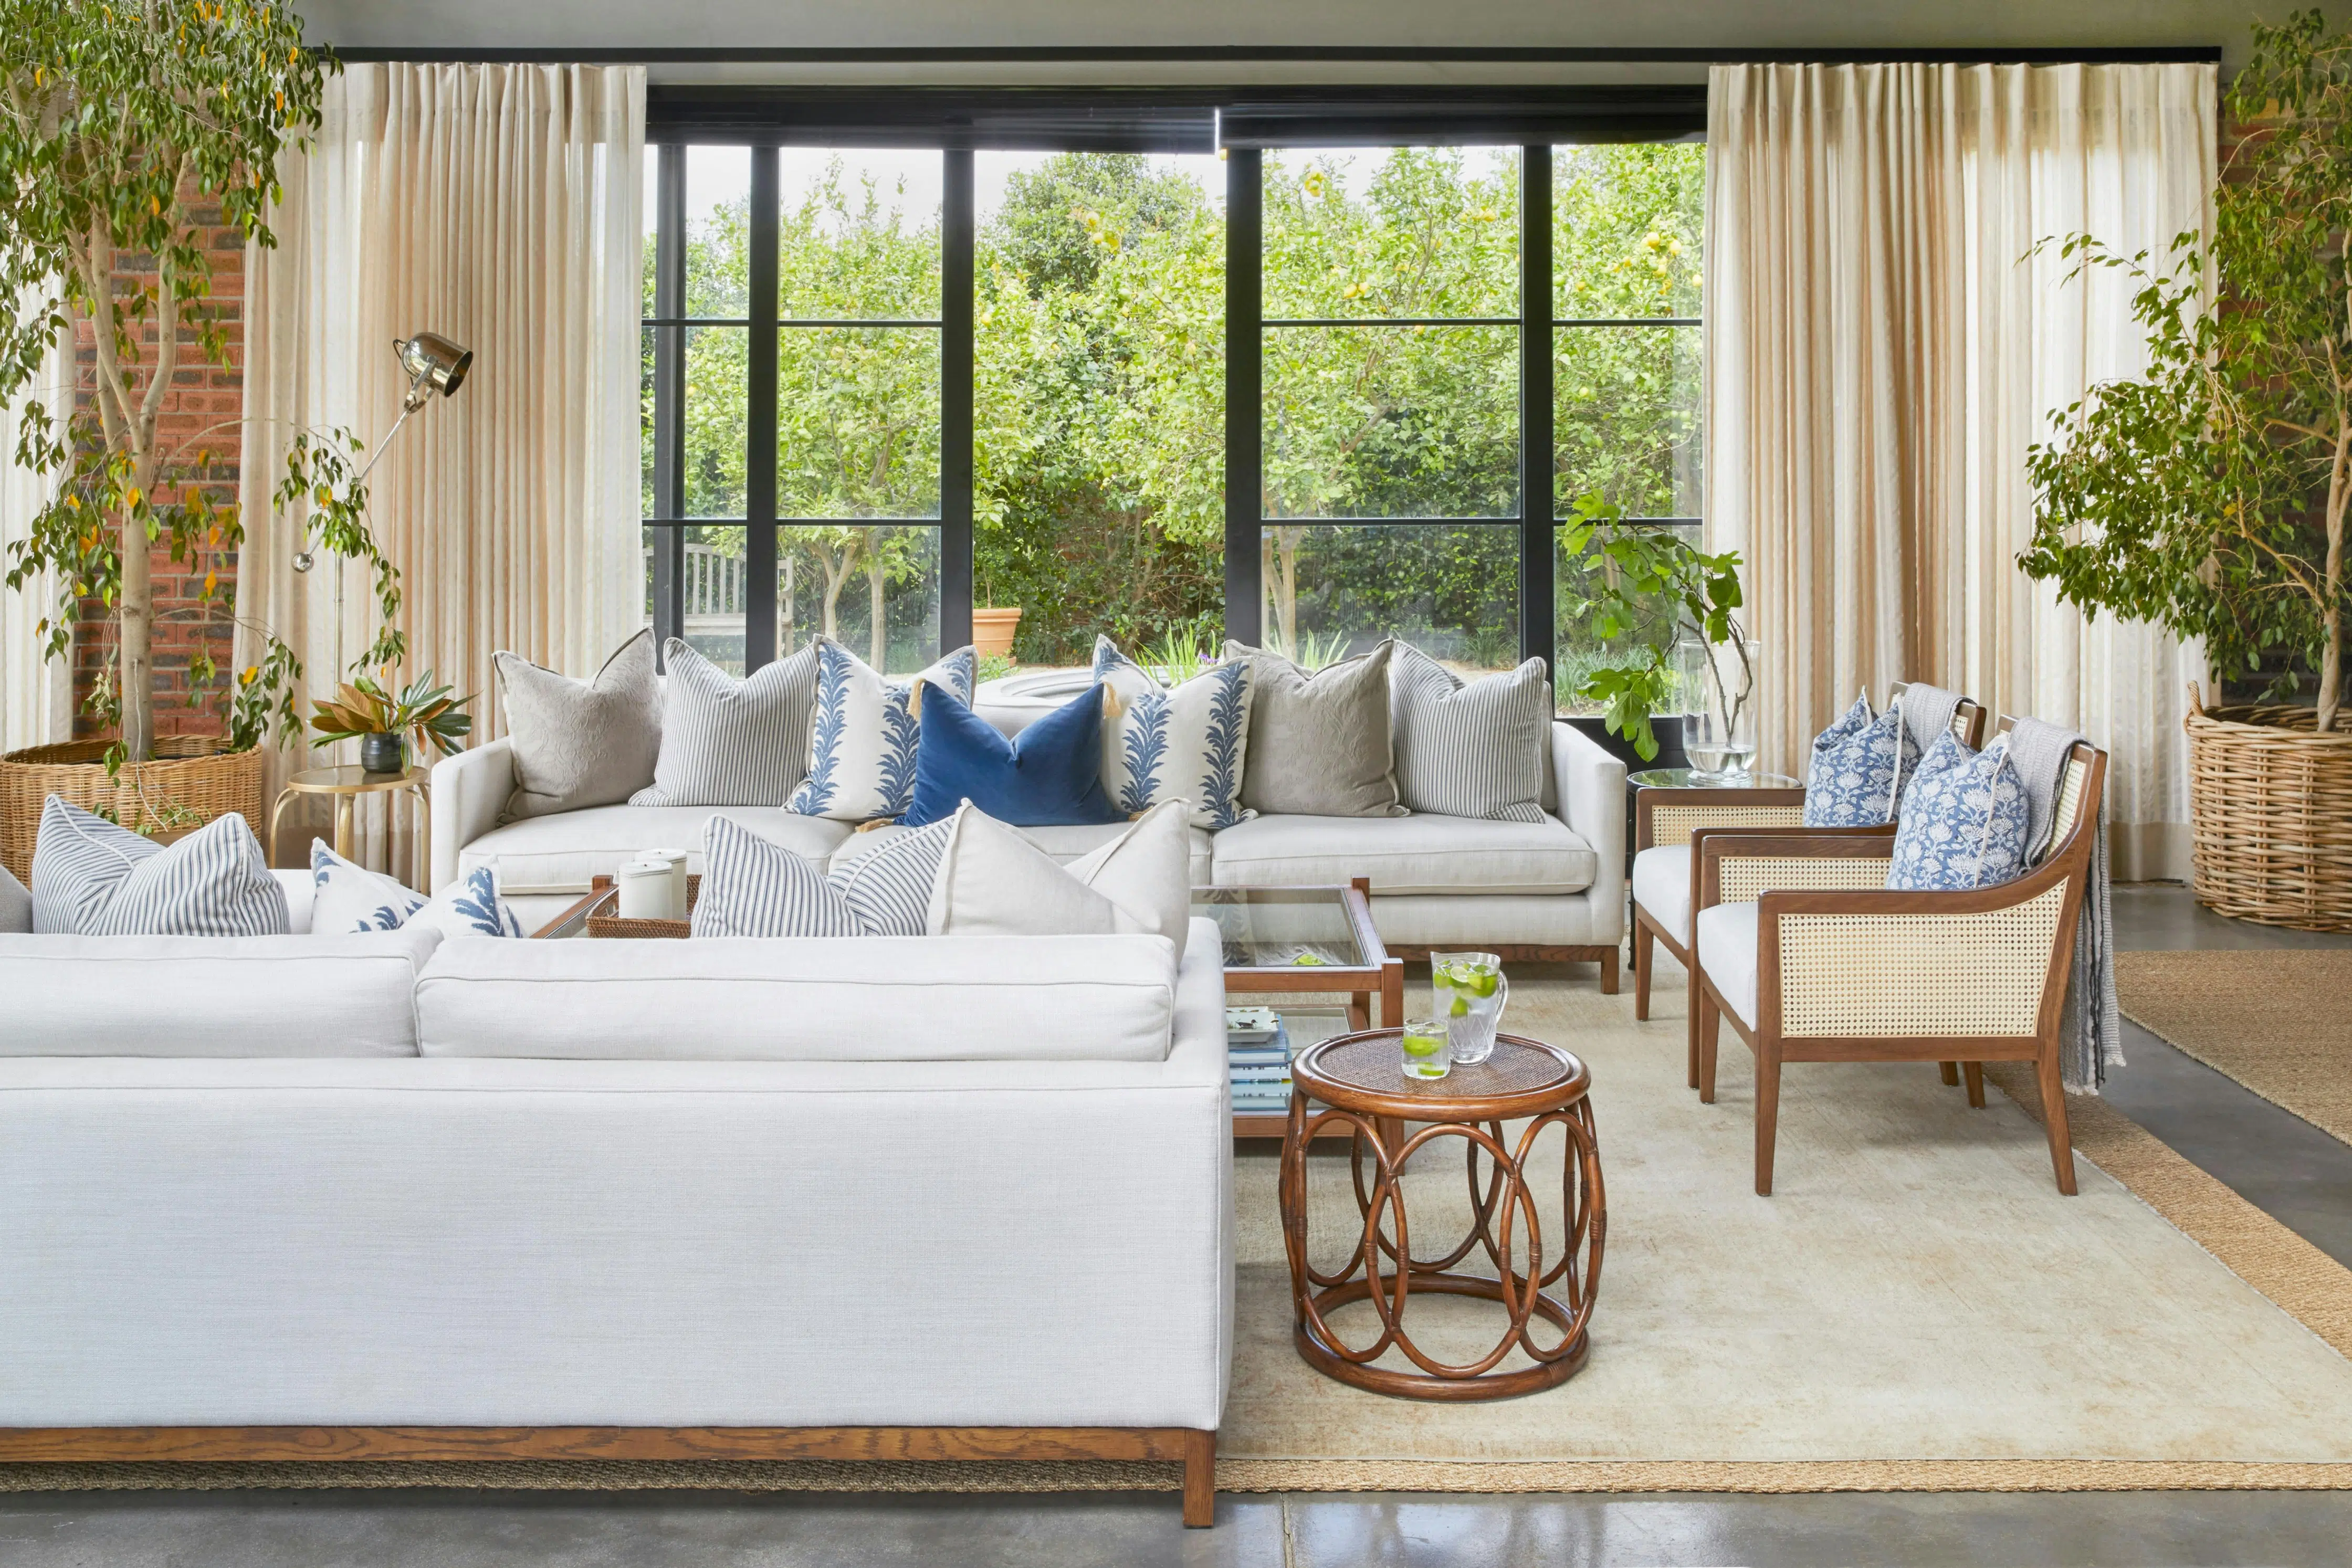 A living area decorated in neutral tones, natural wood, blue-patterned cushions, and fresh greenery. The garden is visible through glass doors